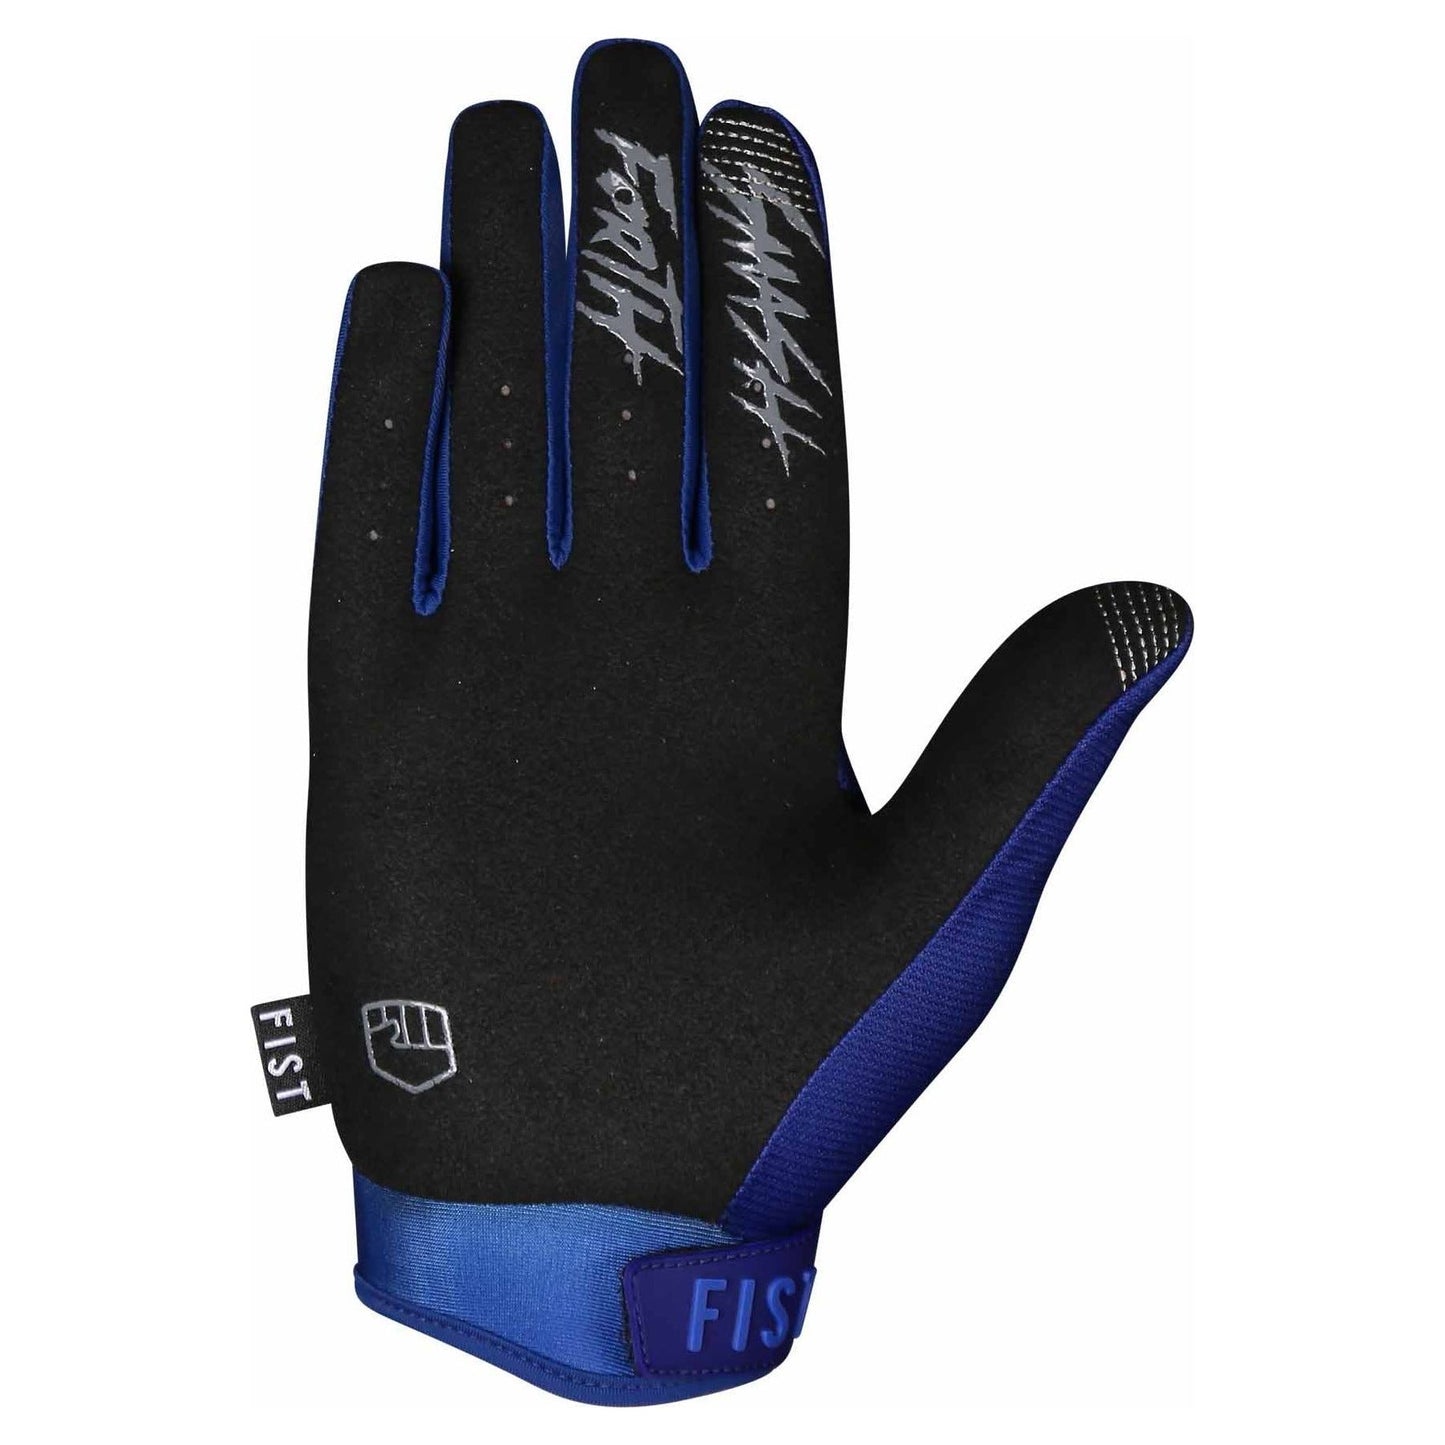 Fist Handwear Stocker Youth Strapped Glove - Youth S - Blue Stocker - Image 2